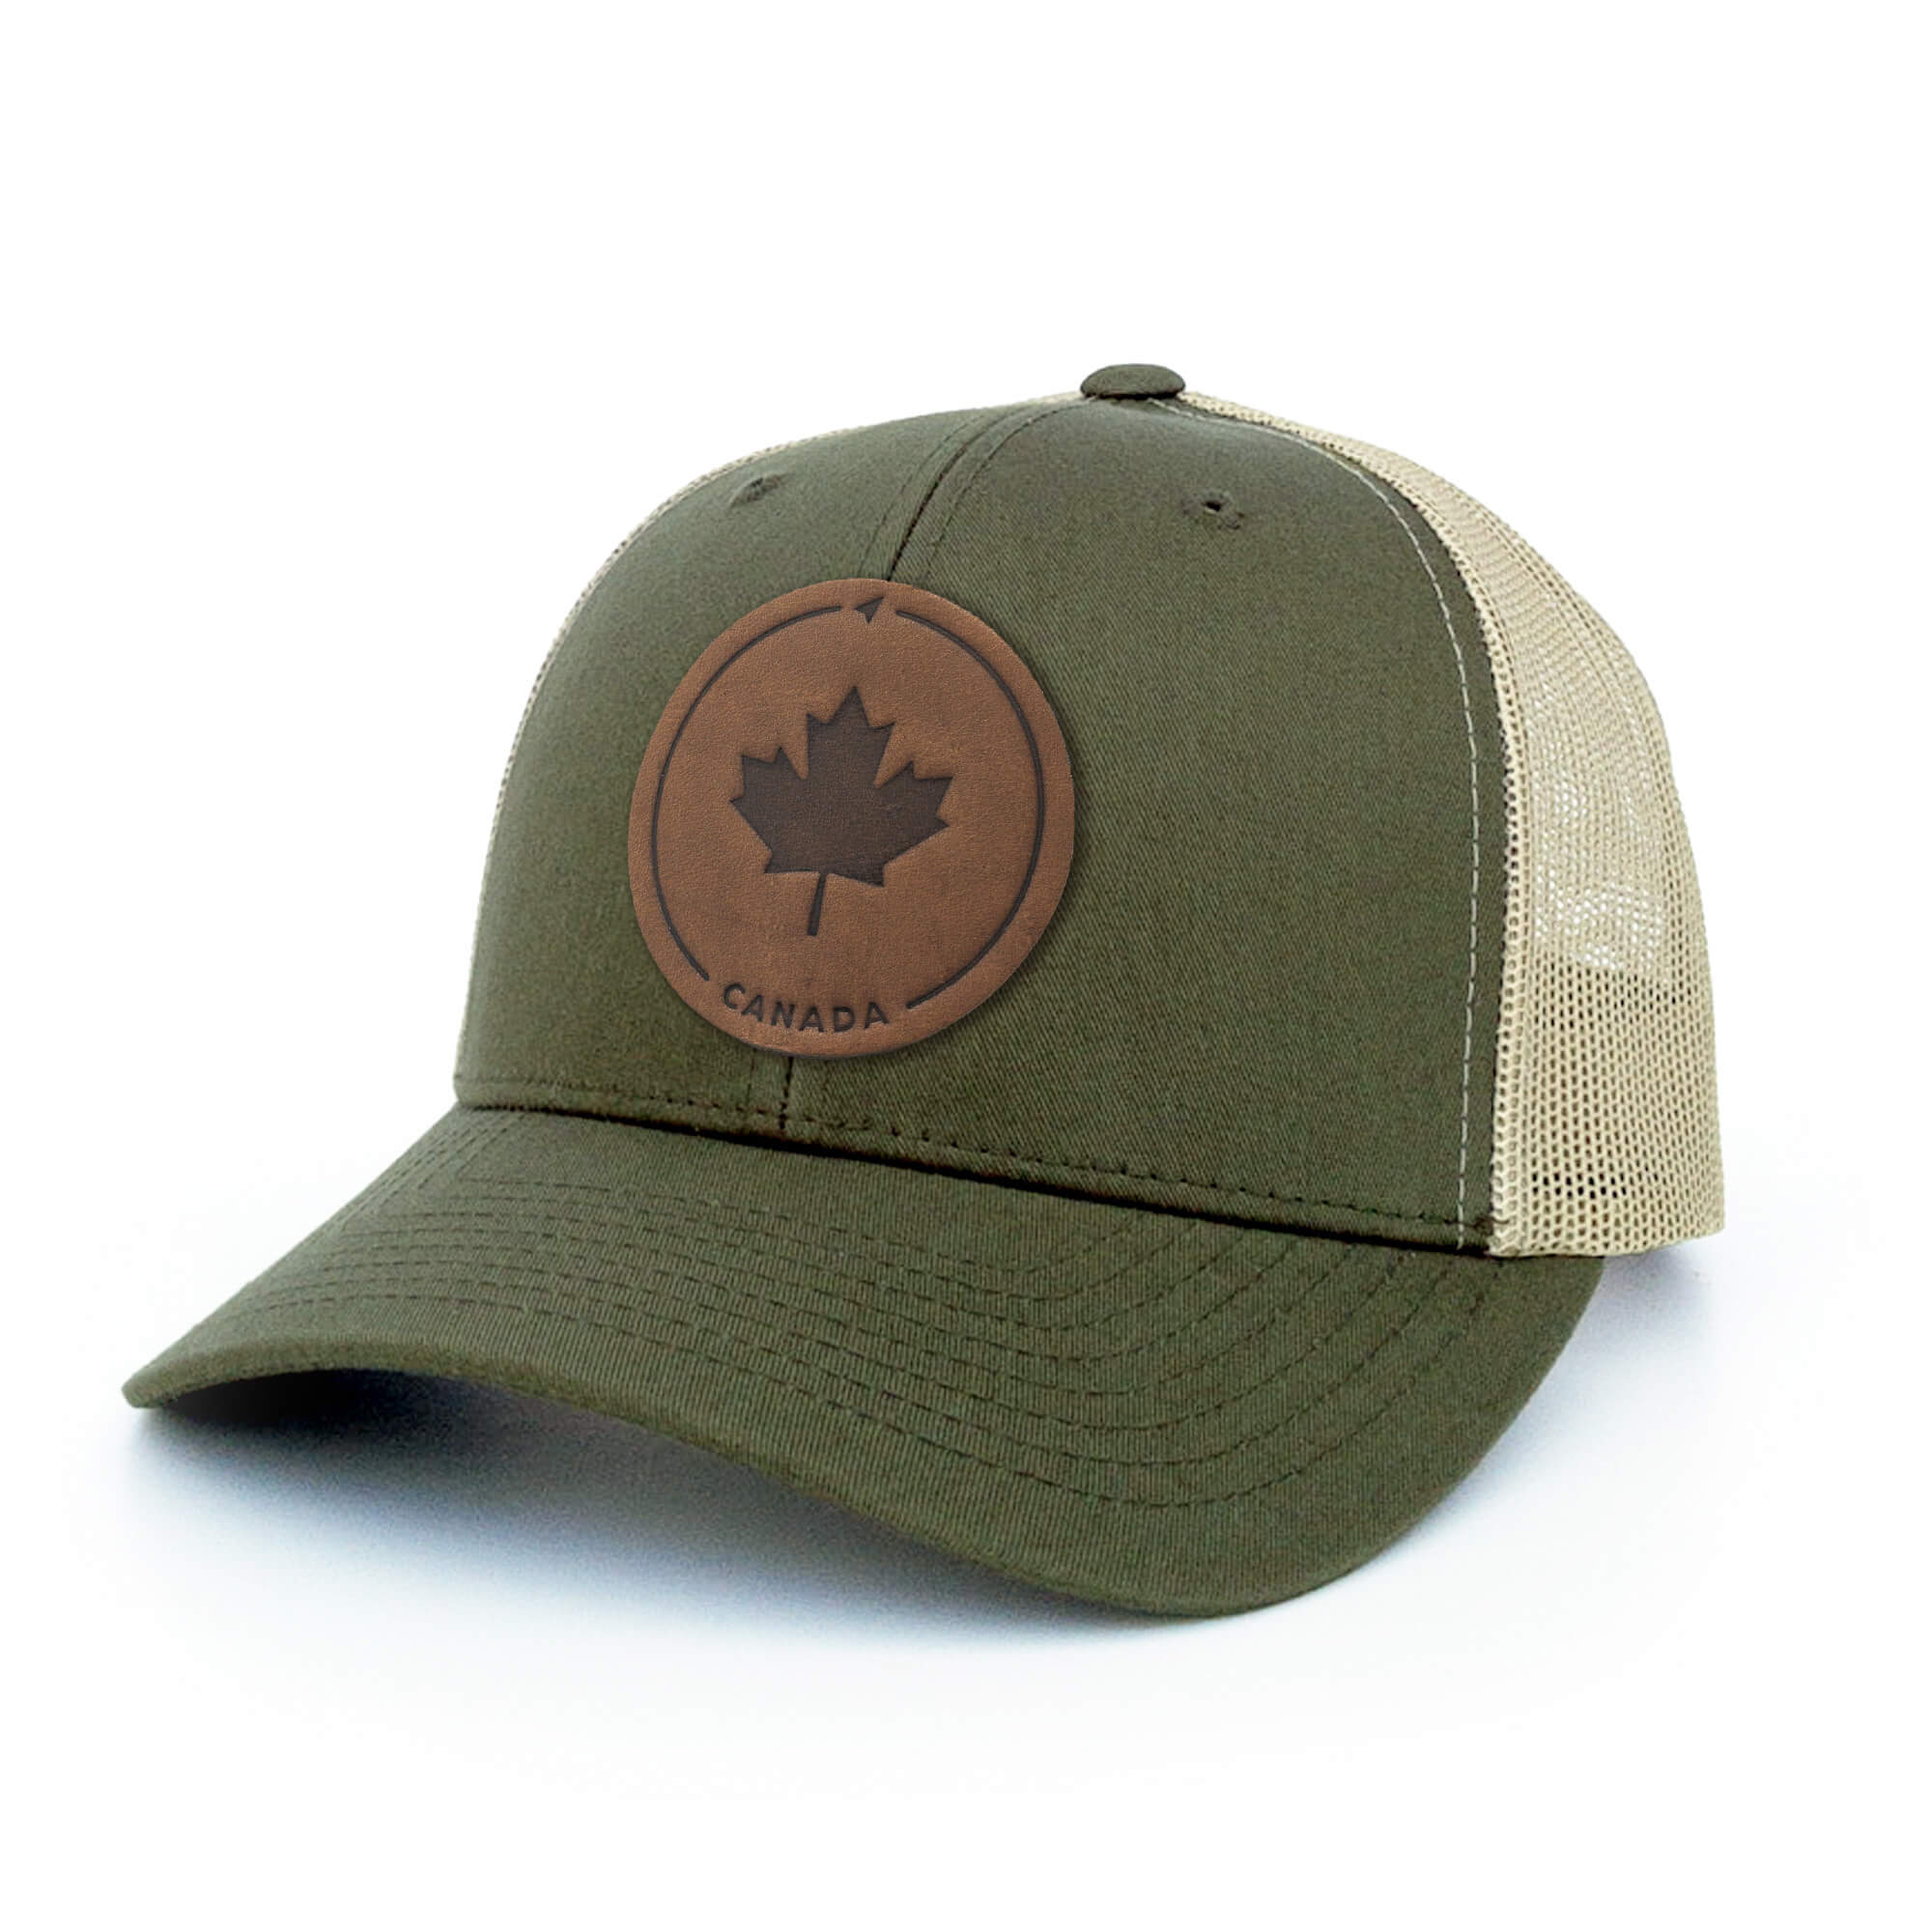 Moss Green and khaki trucker hat with full-grain leather patch of Maple Leaf | BLACK-002-001, CHARC-002-001, NAVY-002-001, HGREY-002-001, MOSS-002-001, BROWN-002-001, RED-002-001